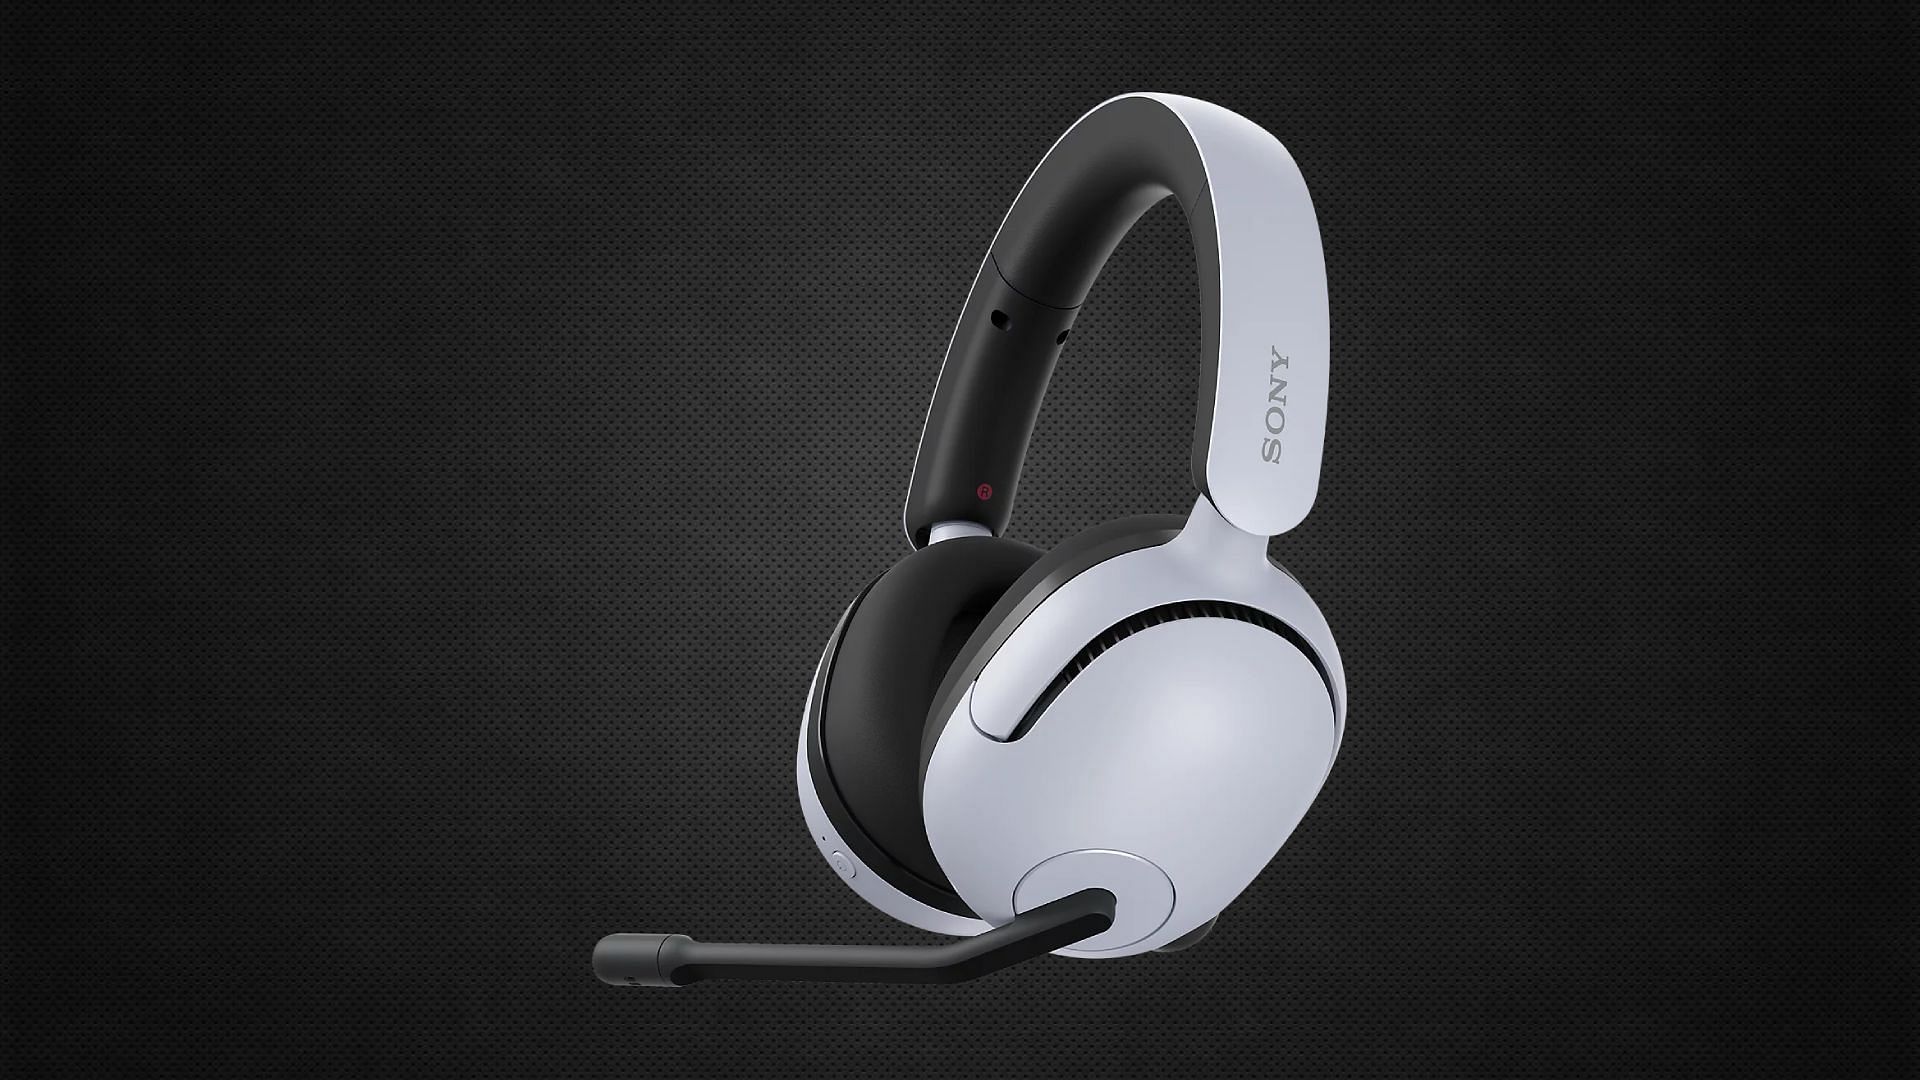 Inzone H5 wireless headset (Images via Sony and WallpaperUP)